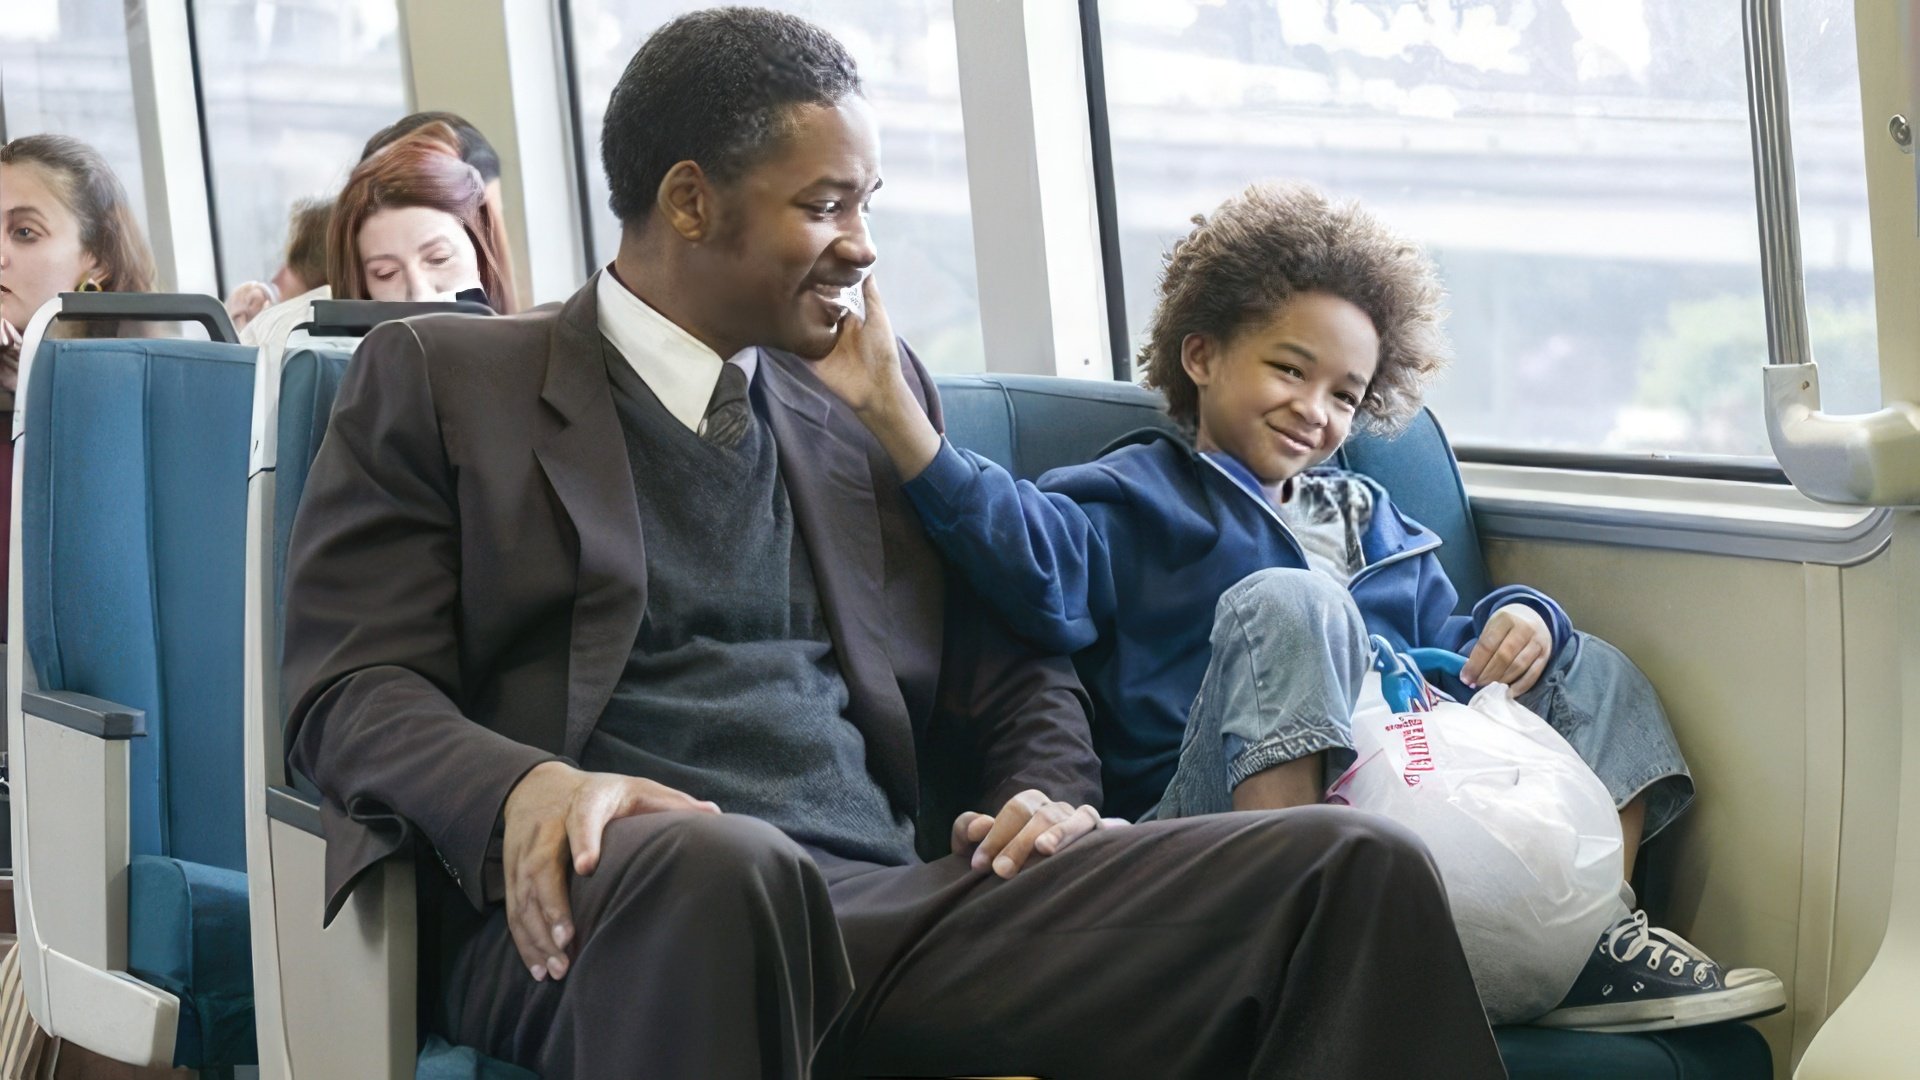 A shot from the movie 'The Pursuit of Happyness'